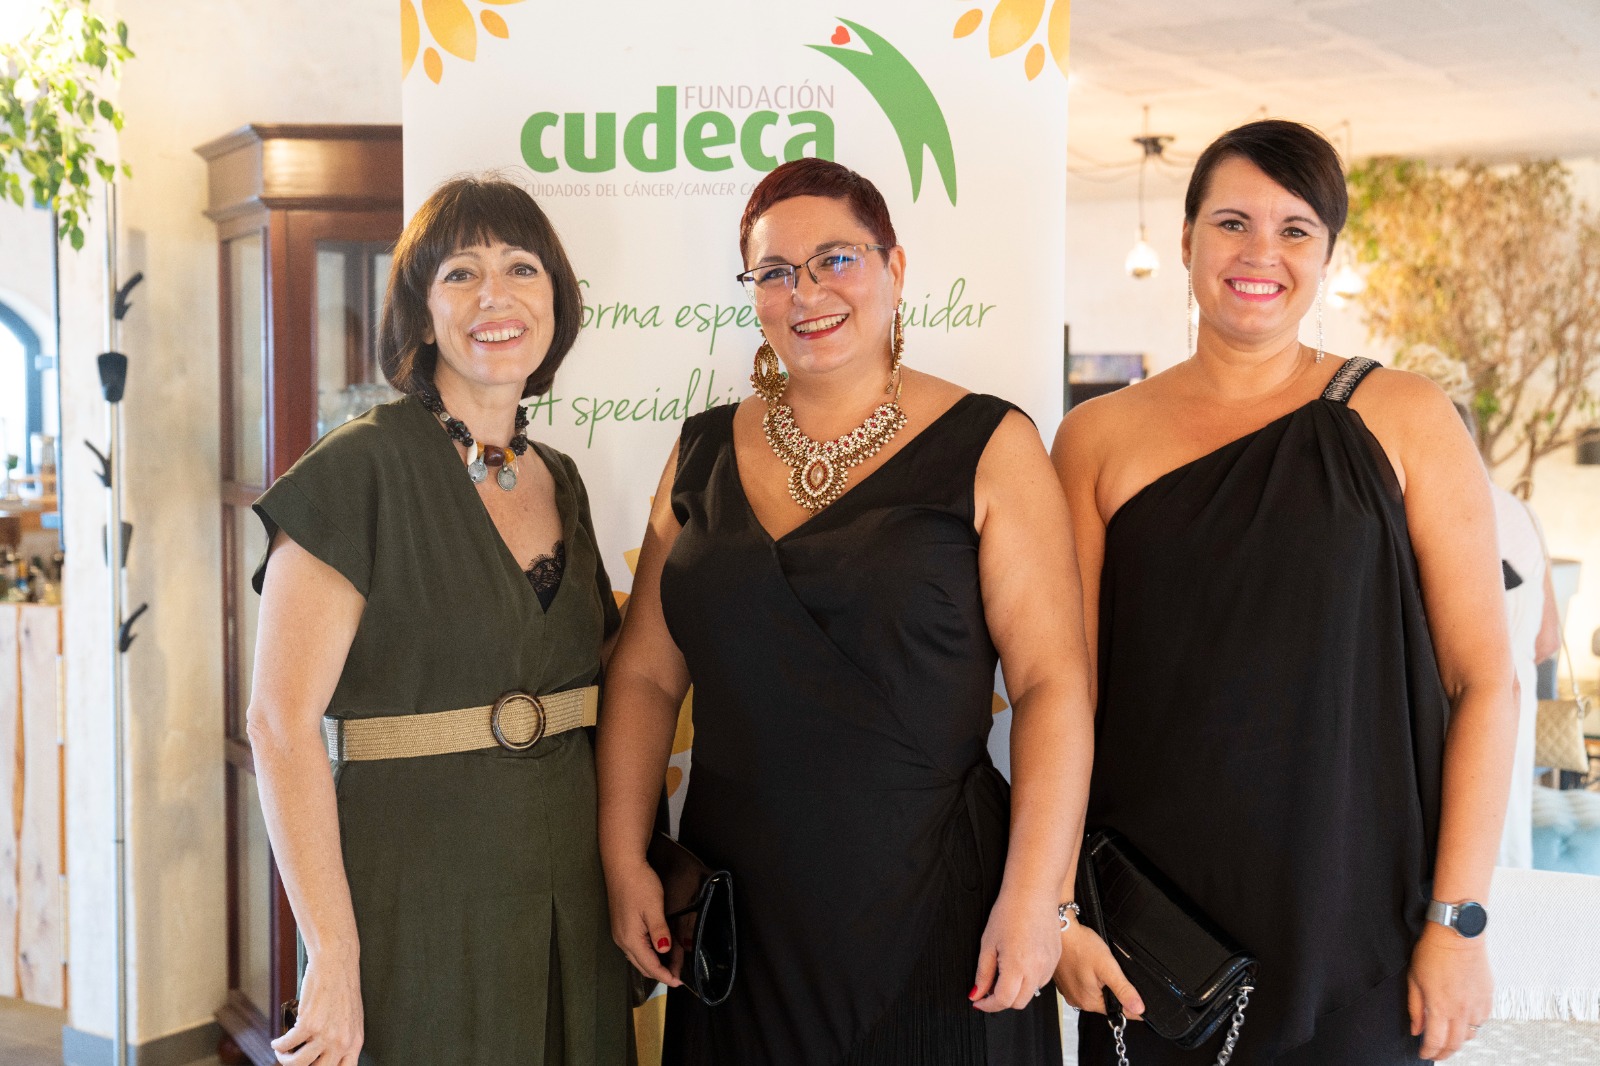 Costa Women End of Summer Charity Party surprised everyone with a great €900 fundraising for Cudeca!